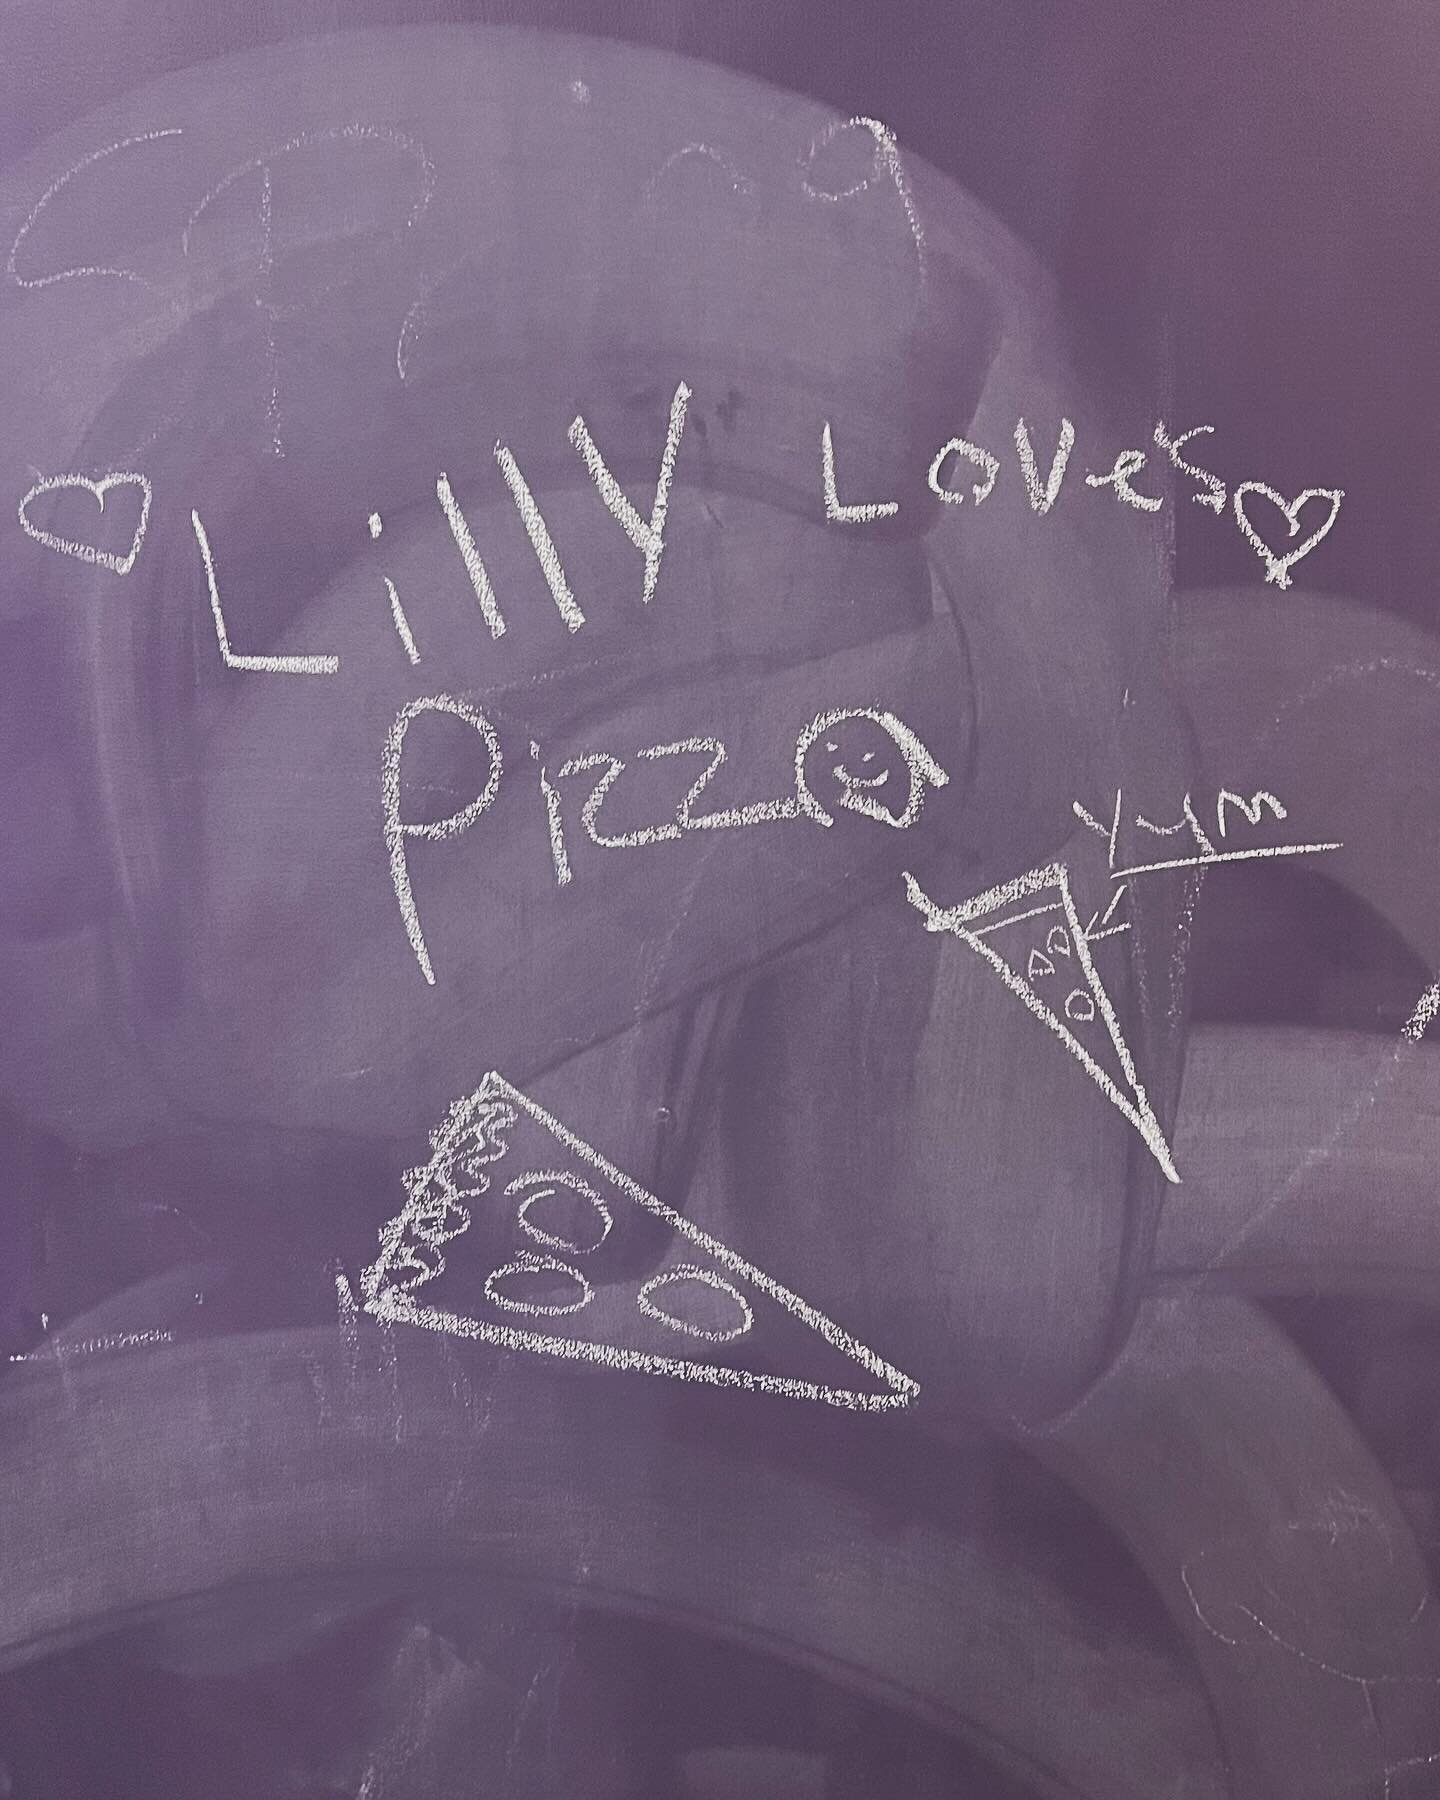 Lilly, we LOVE PIZZA too!!!! And who doesn&rsquo;t love a good joke or gummy bears for that matter! Thank you for exploring with us today.